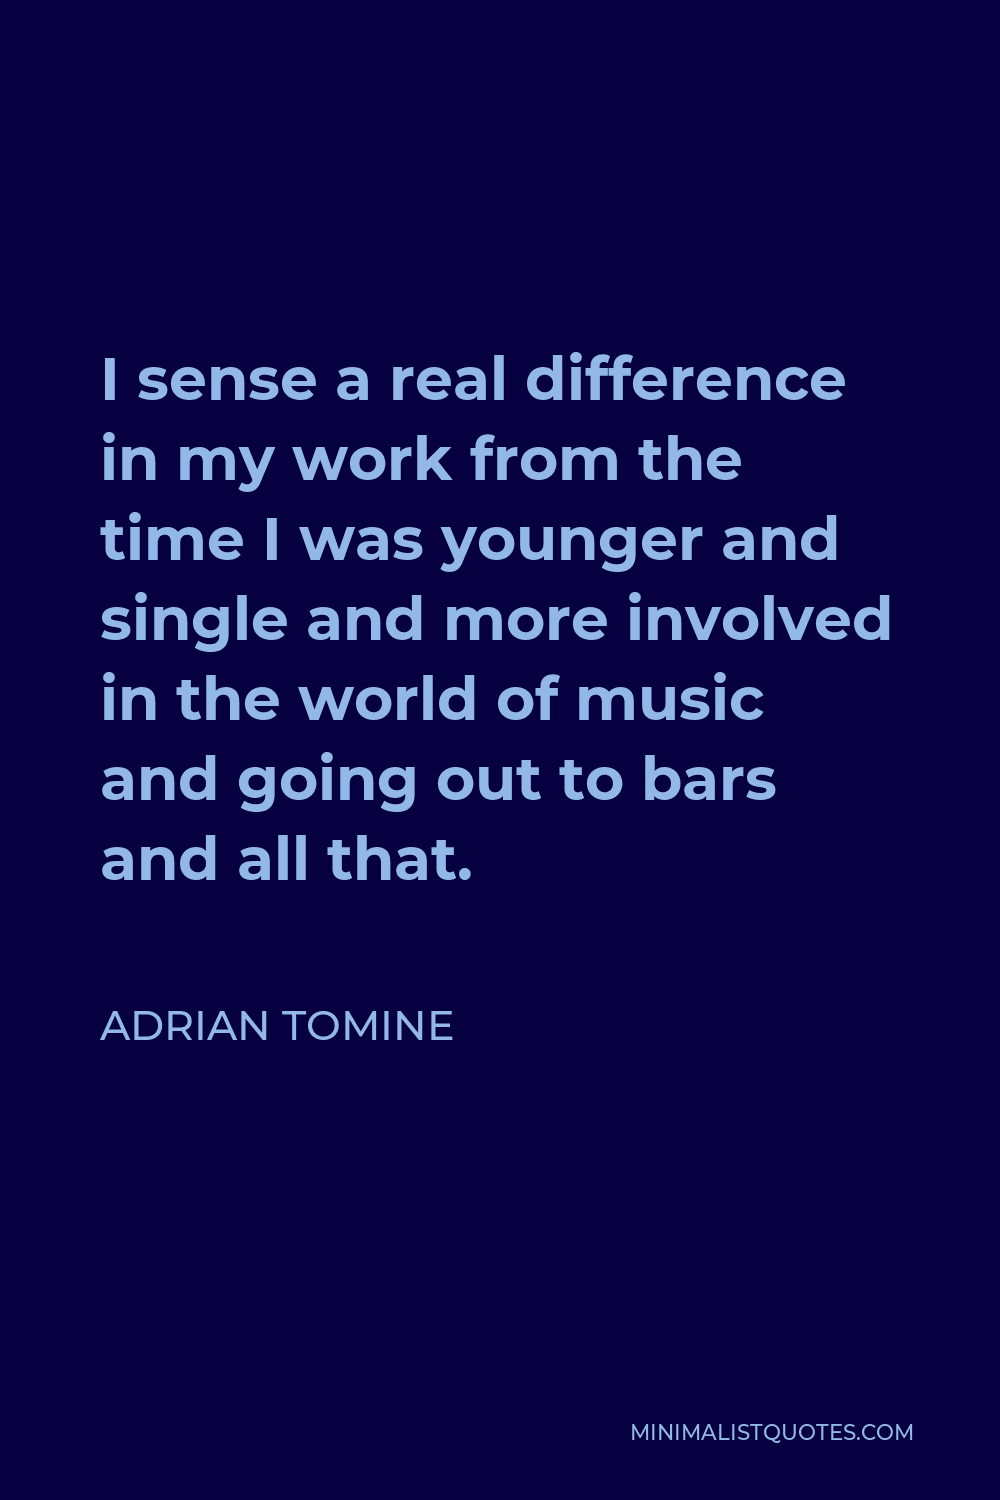 Adrian Tomine Quote - I sense a real difference in my work from the time I was younger and single and more involved in the world of music and going out to bars and all that.